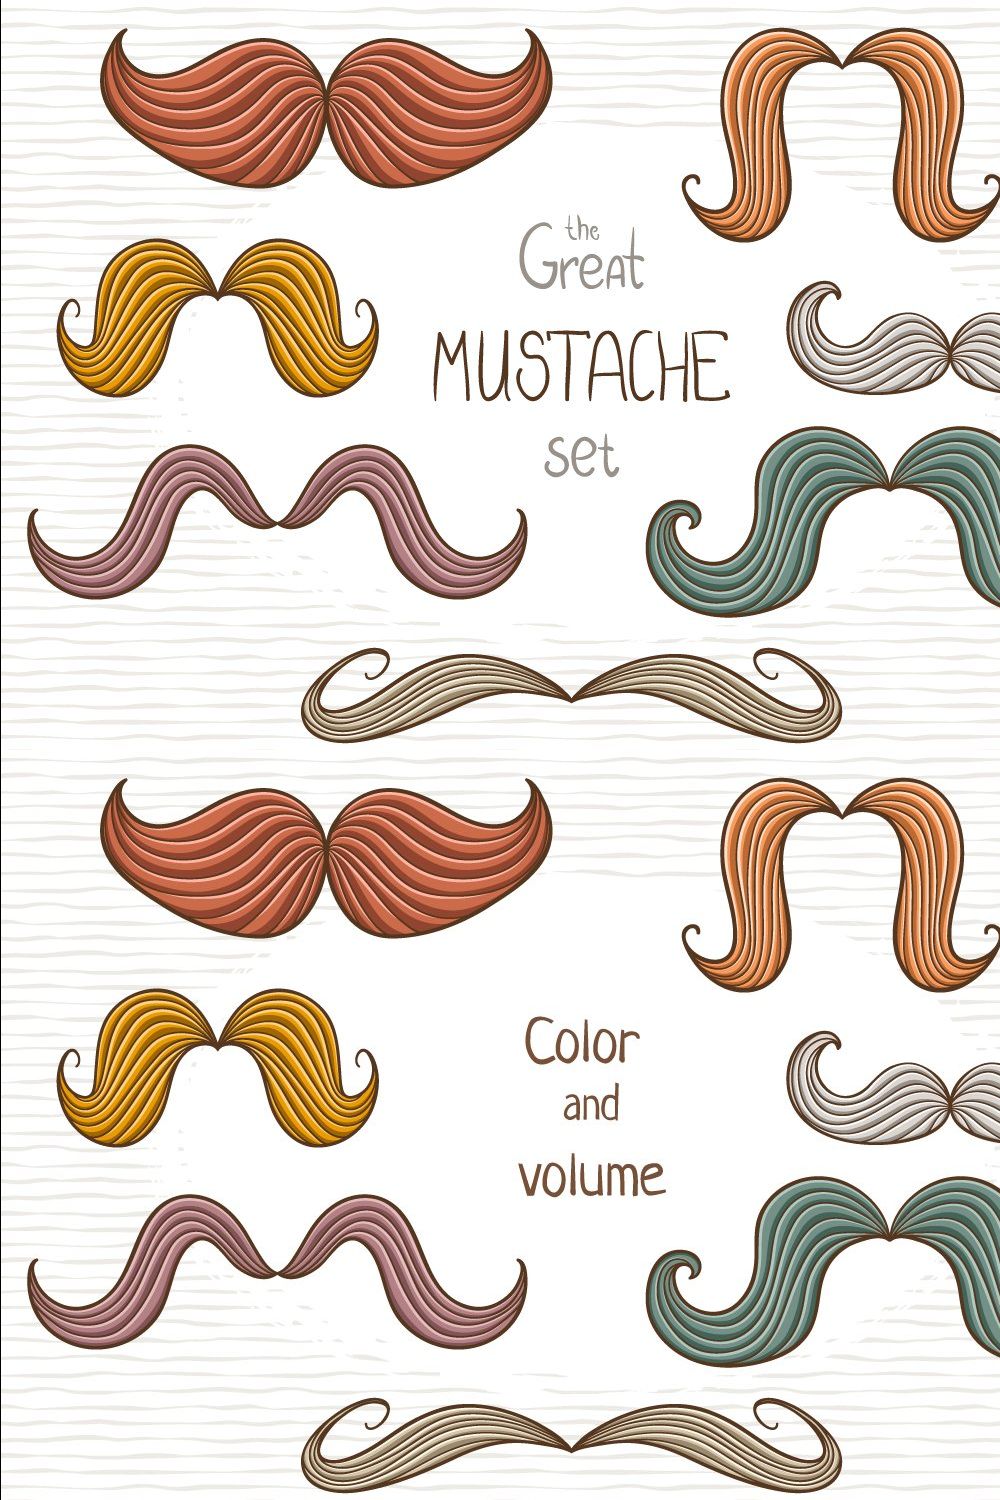 The great mustache set pinterest preview image.